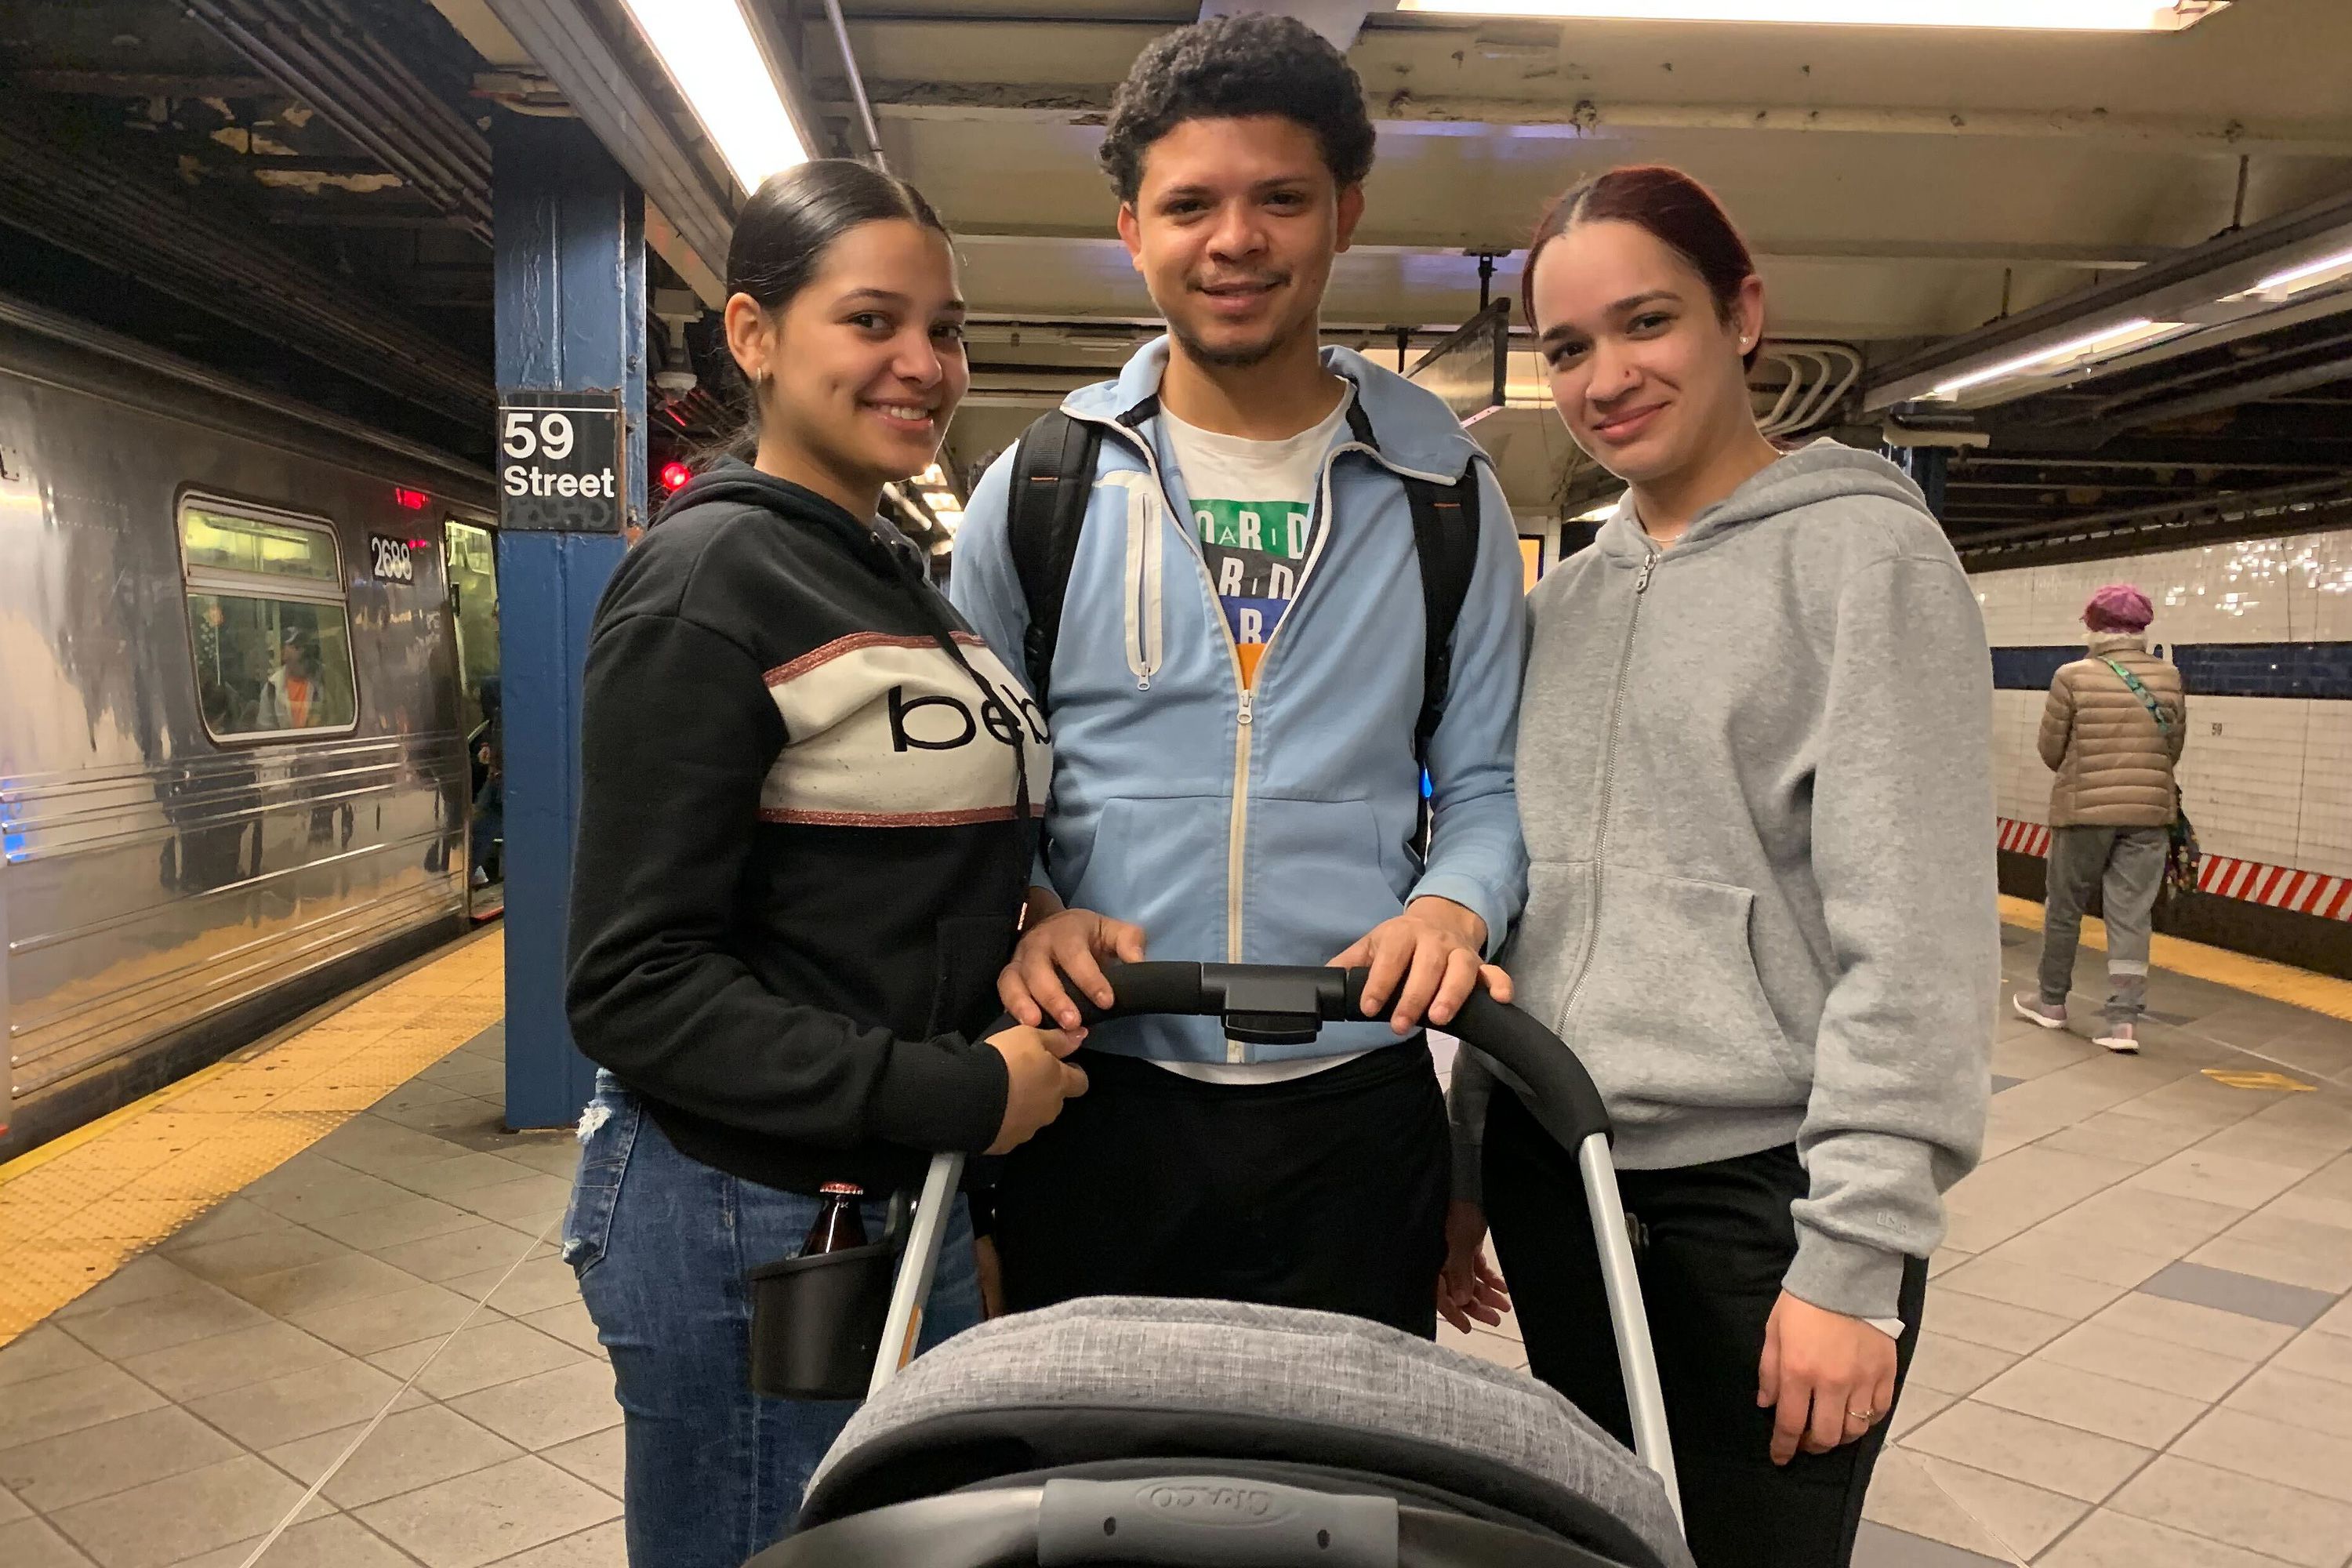 Genesis Diaz, left, her boyfriend Eliesel Perez and friend Solanyi Polanco spoke at 59th Street-Columbus Circle about avoiding urine-soaked elevators, May 5, 2023.